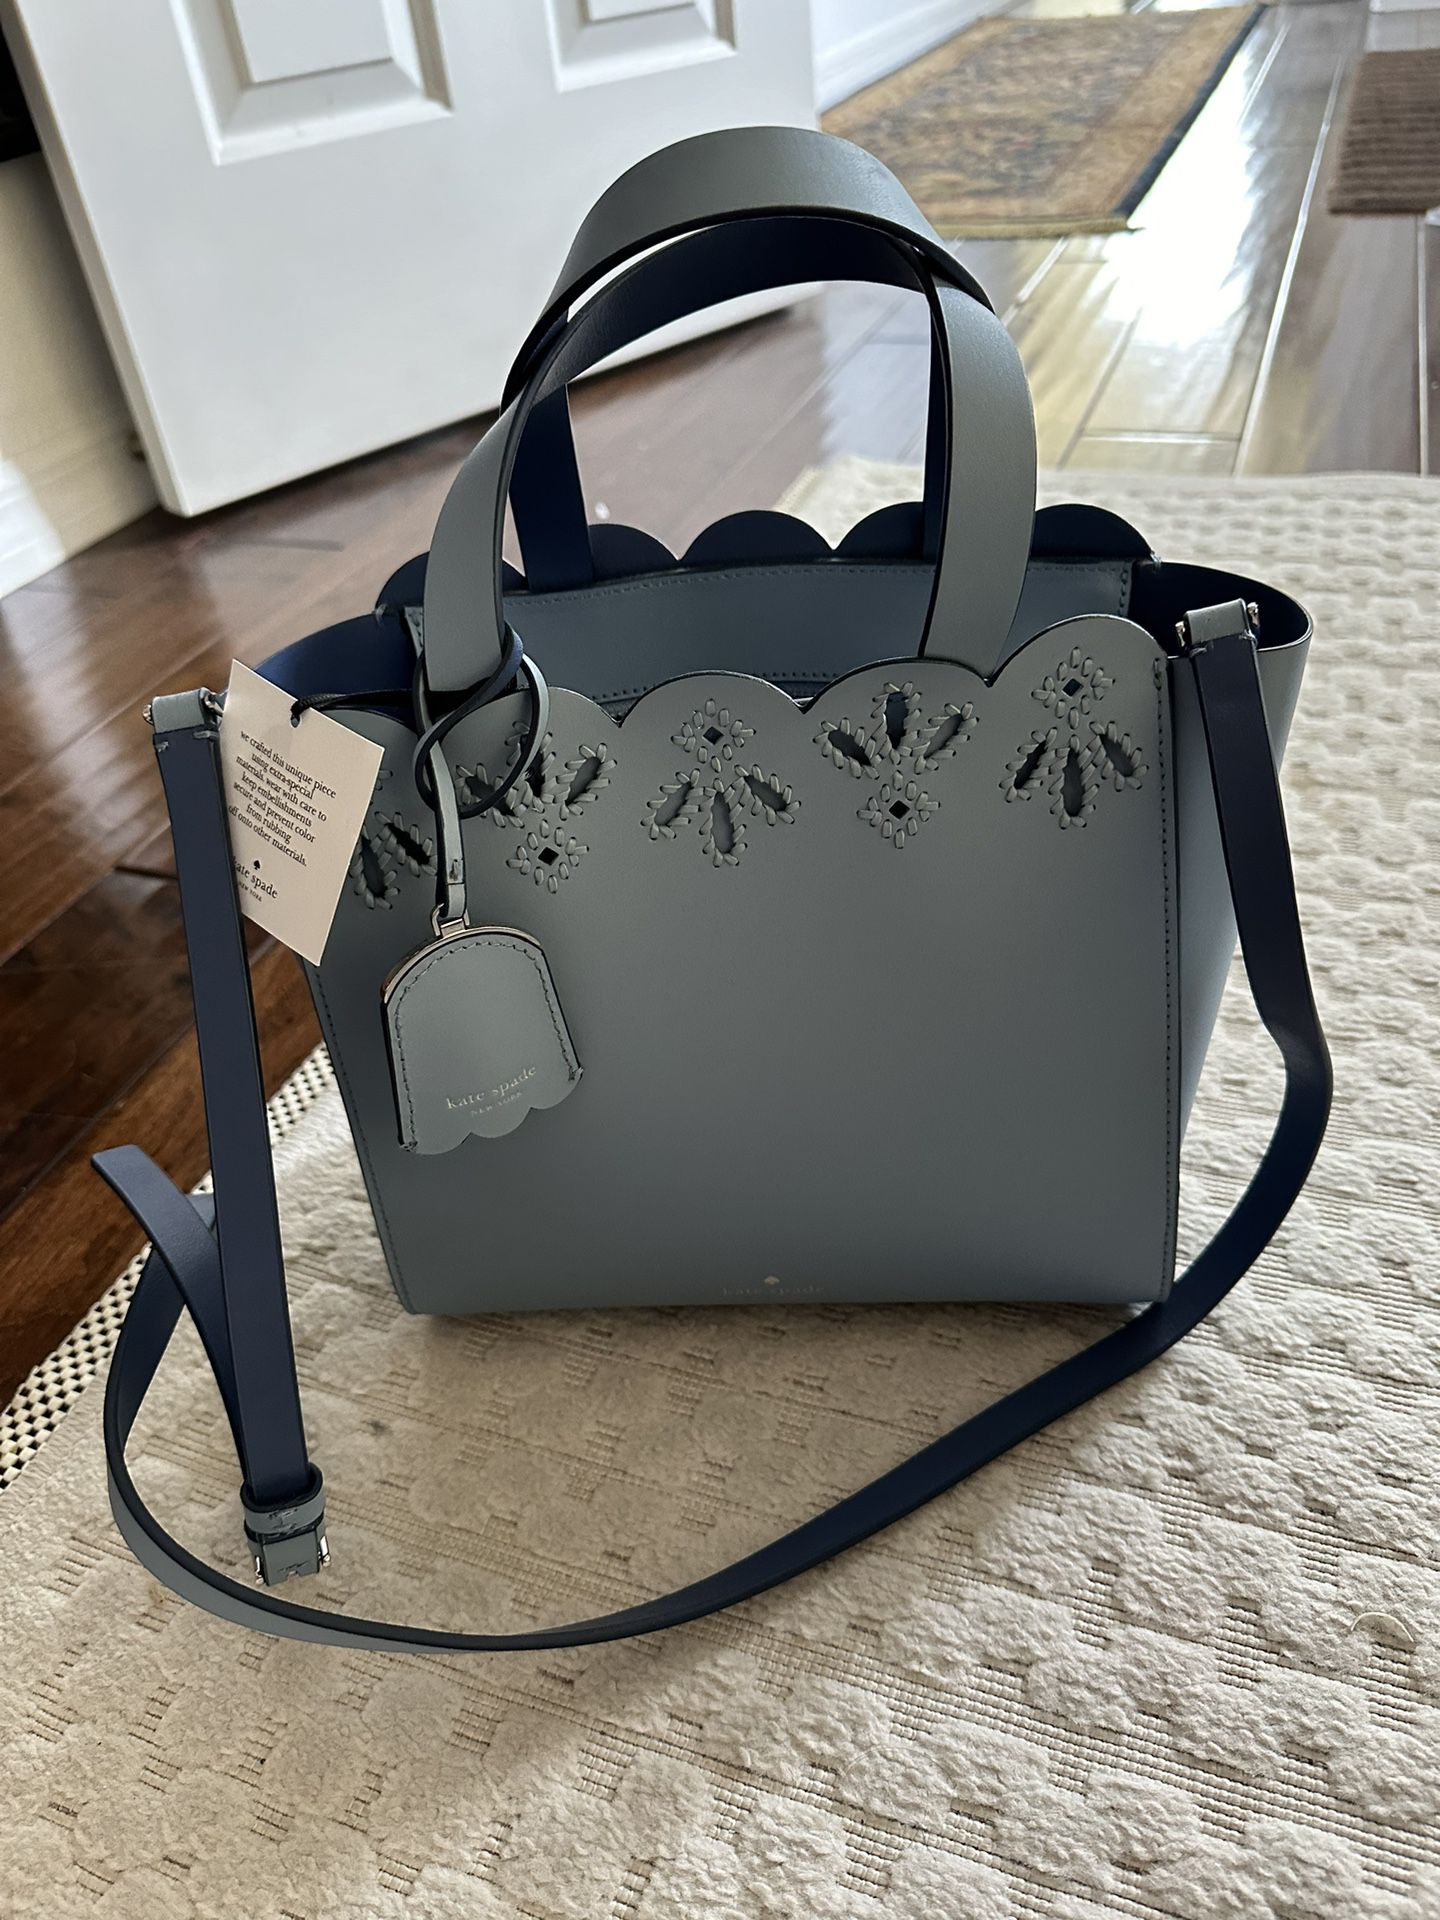 Brand New Authentic Kate Spade Purse 